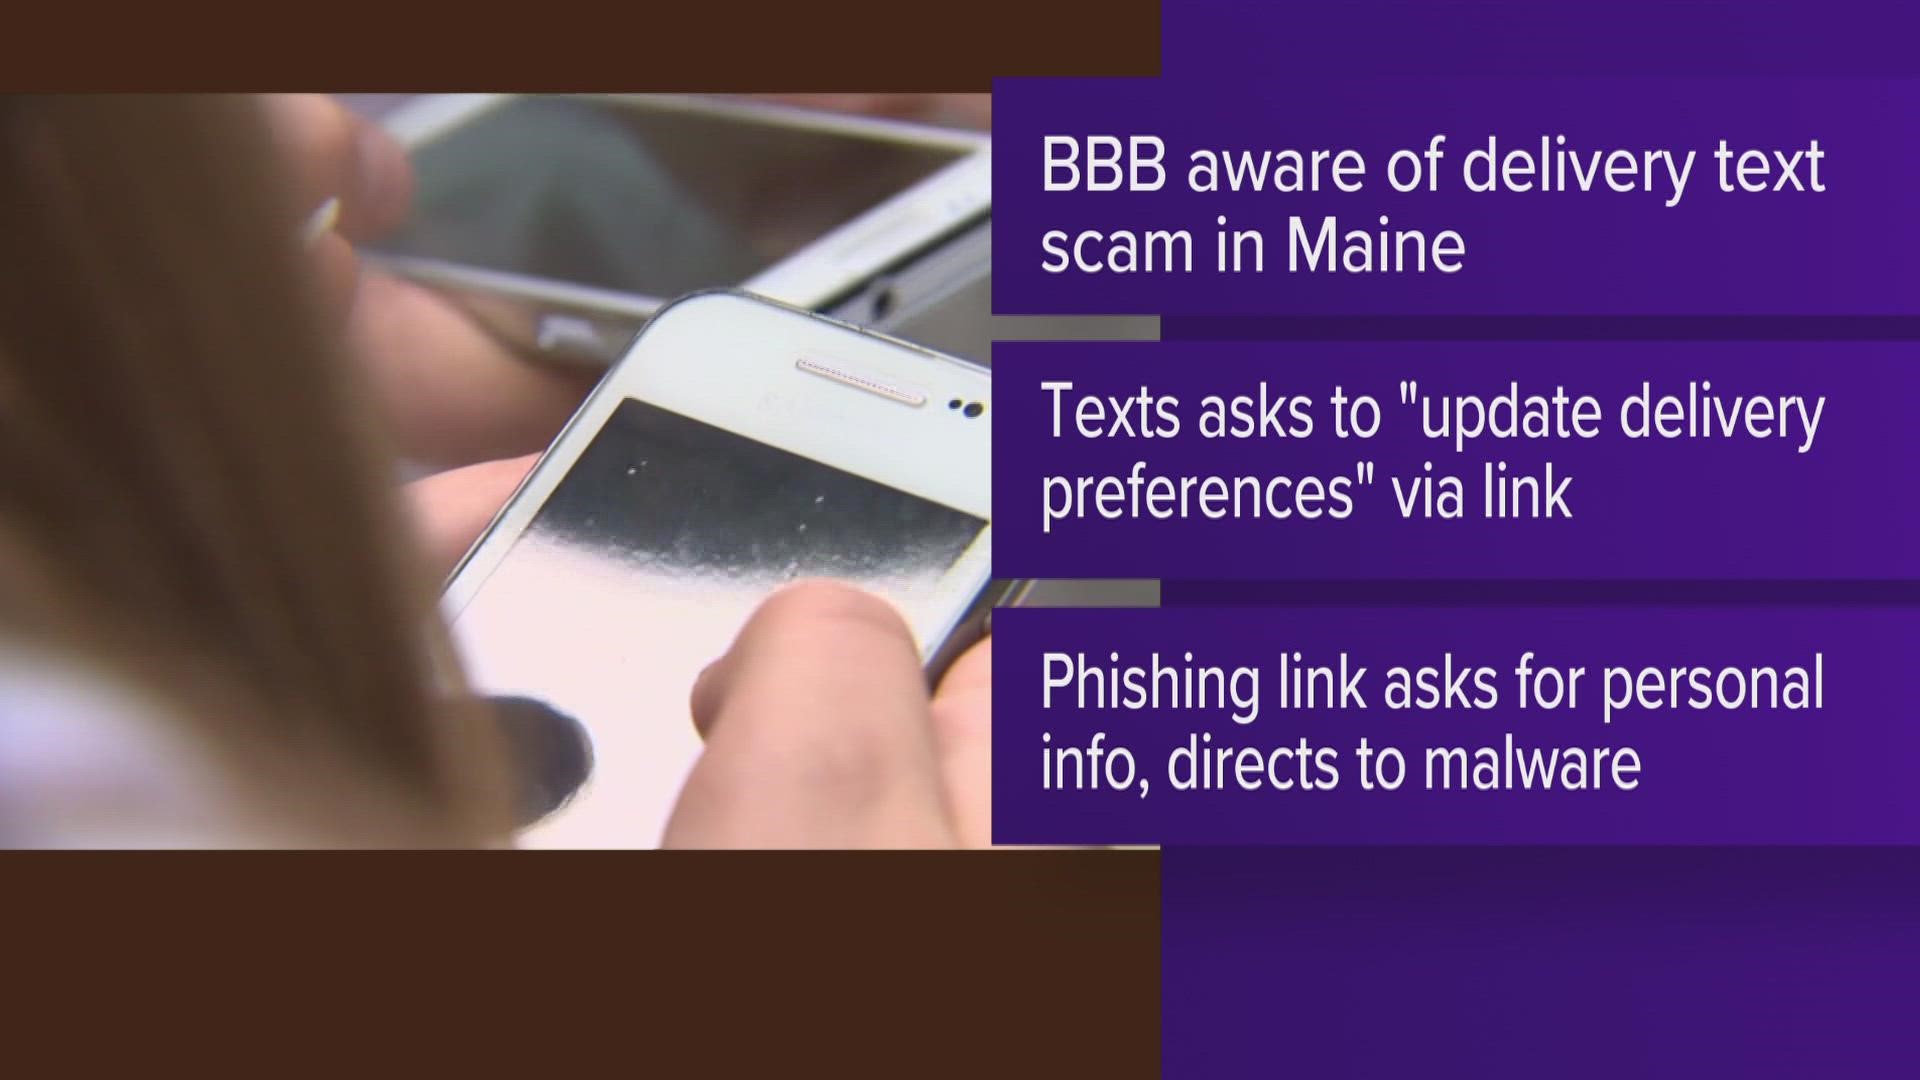 The text is a scam, and the scammers use the link to steal your personal information, according to BBB.